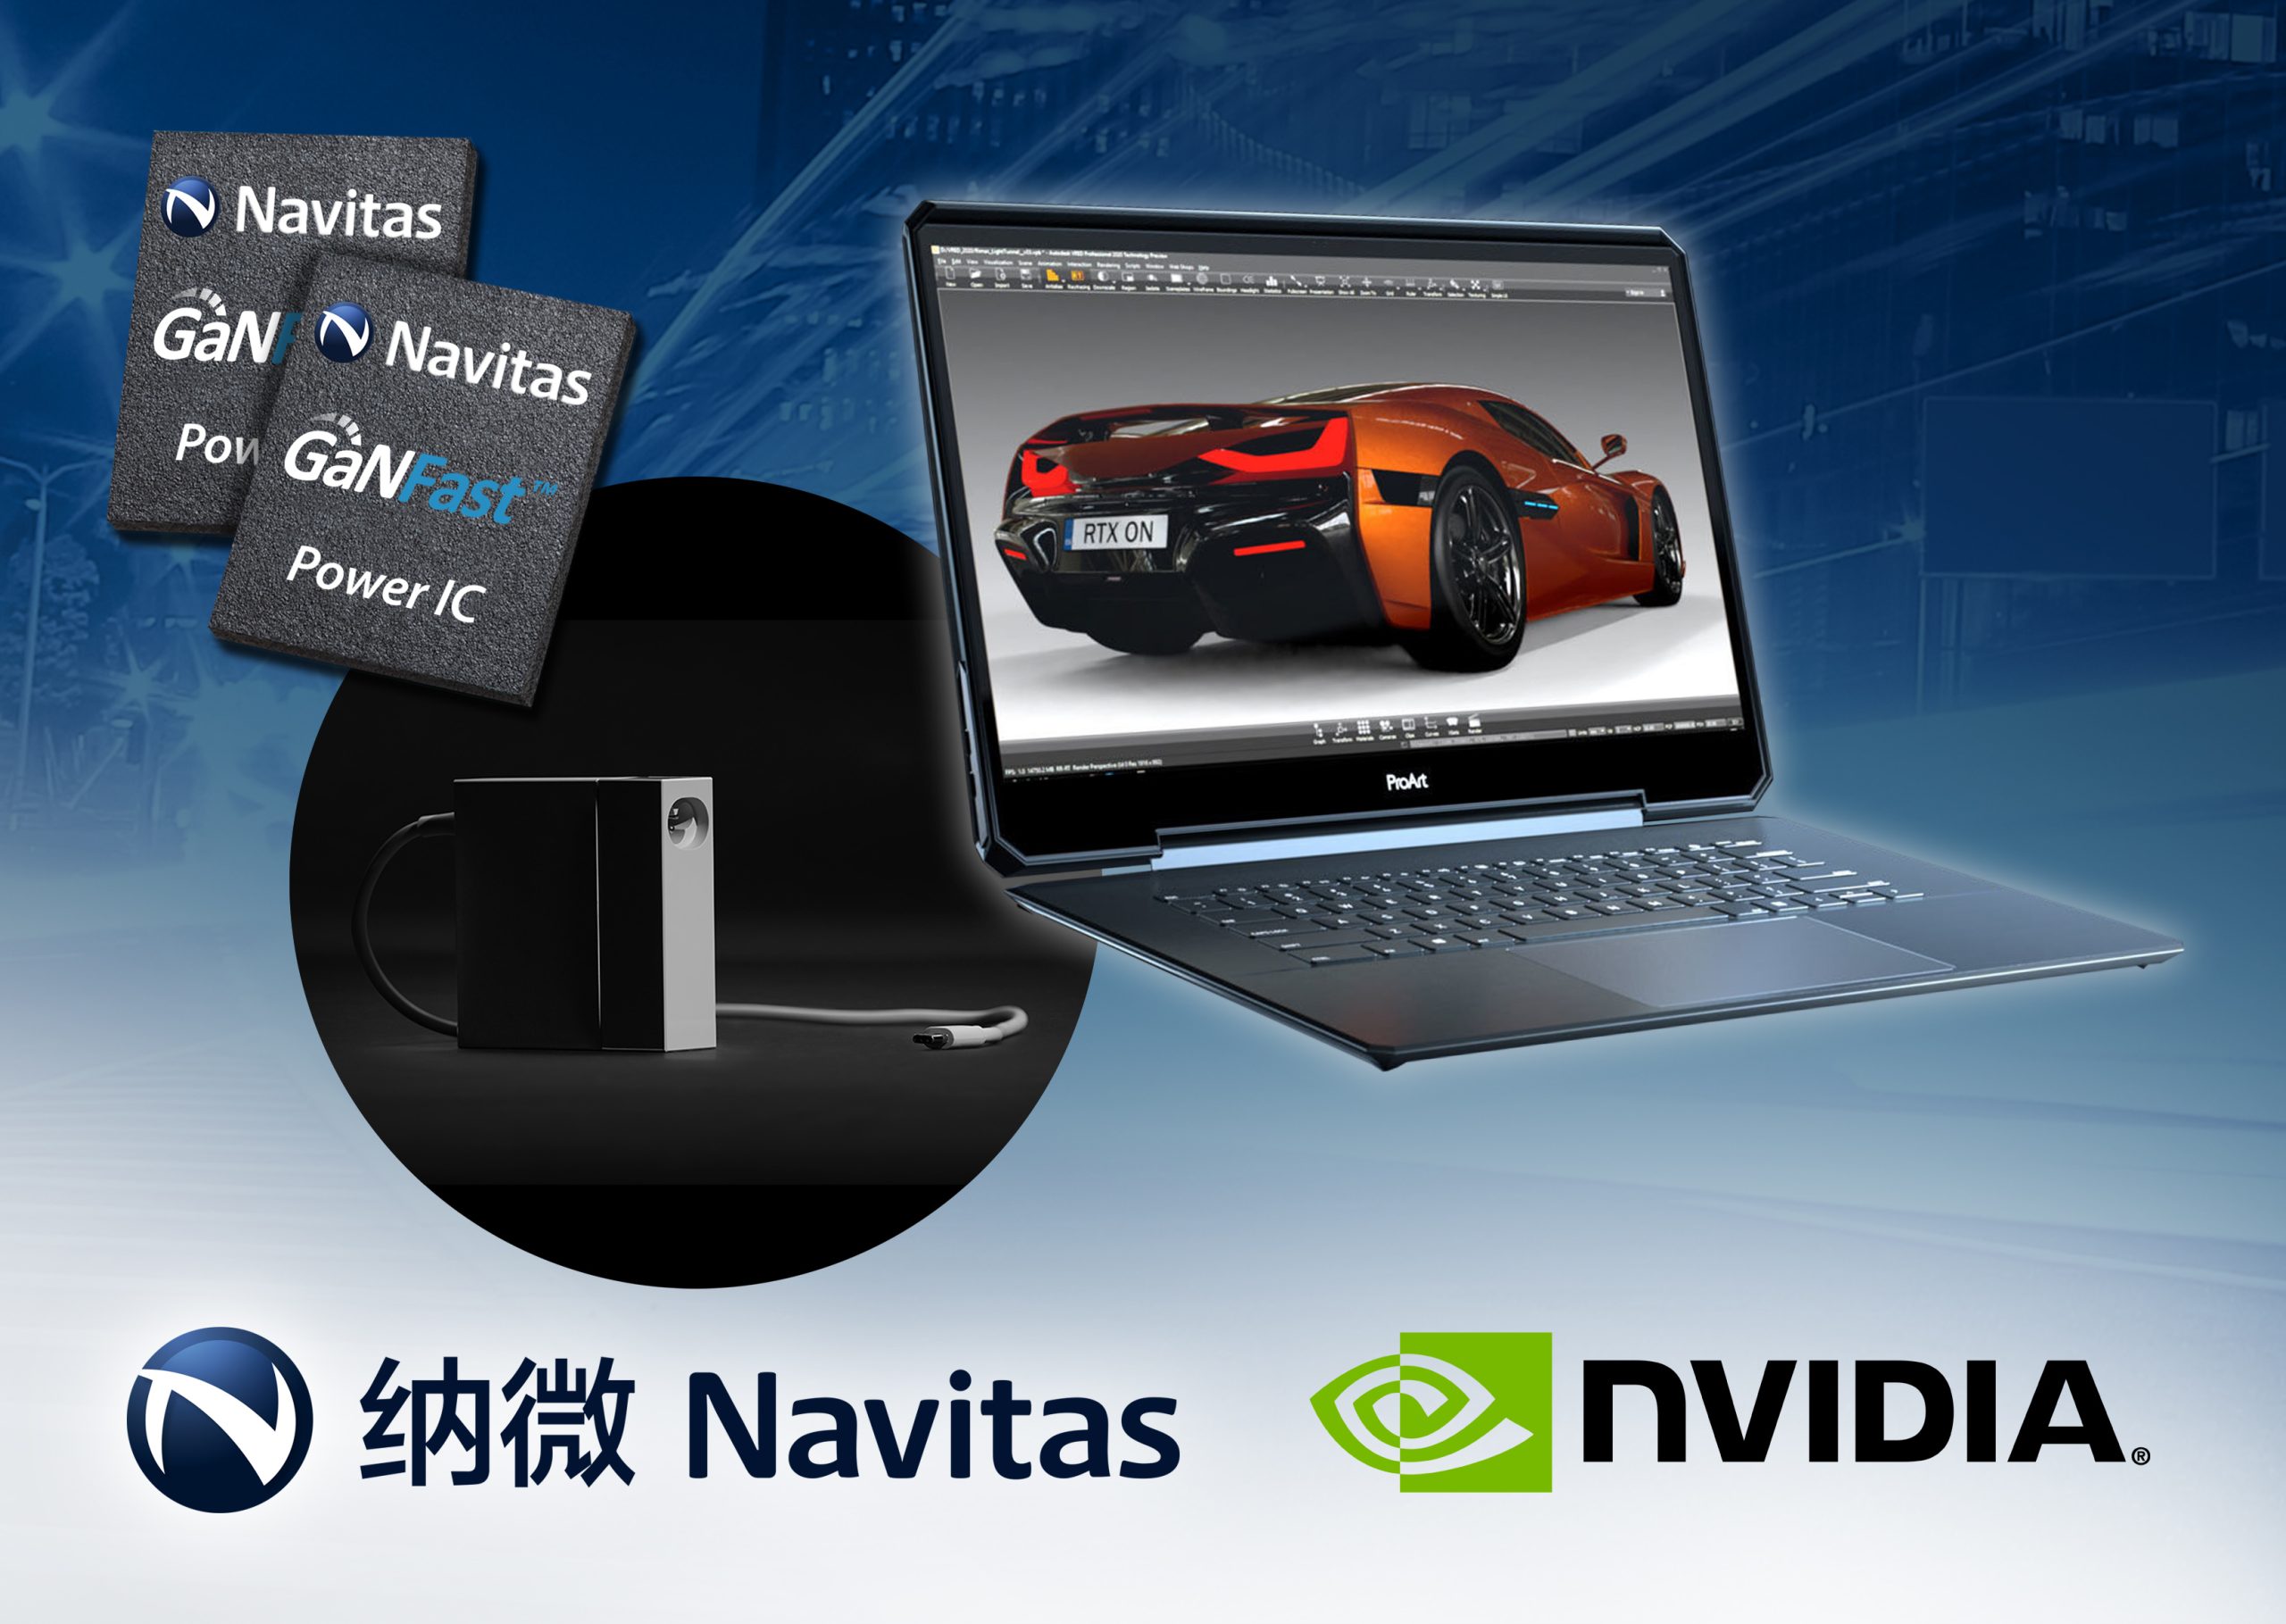 Navitas Enables World’s Smallest Adapter for World’s Fastest Laptop